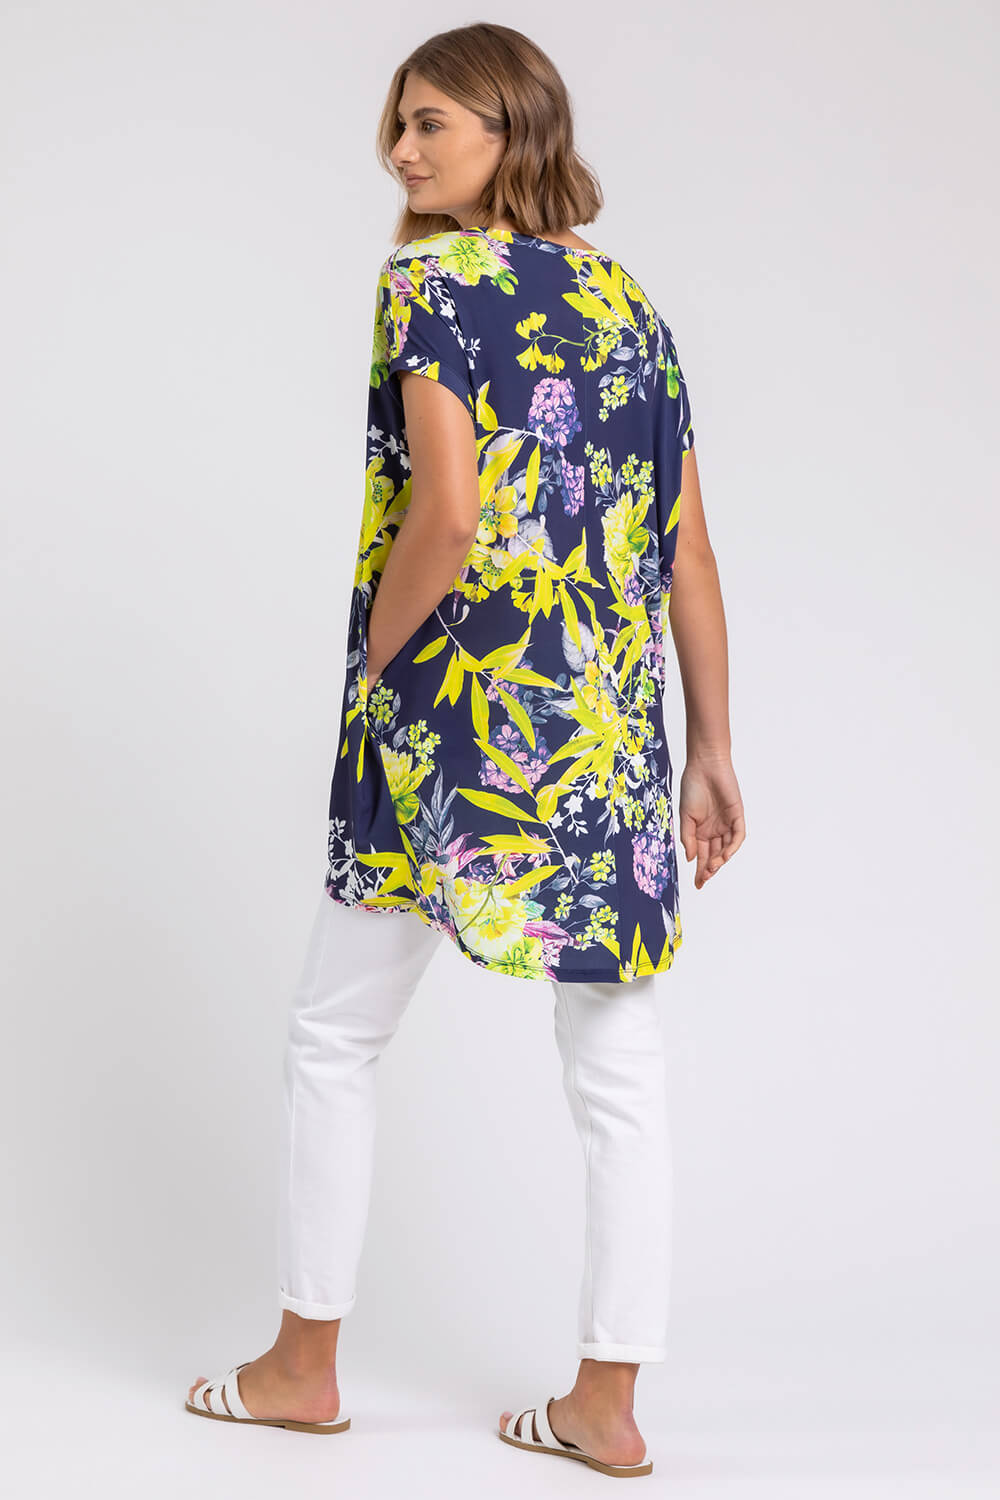 Yellow Floral Print Pocket Tunic Top , Image 2 of 4